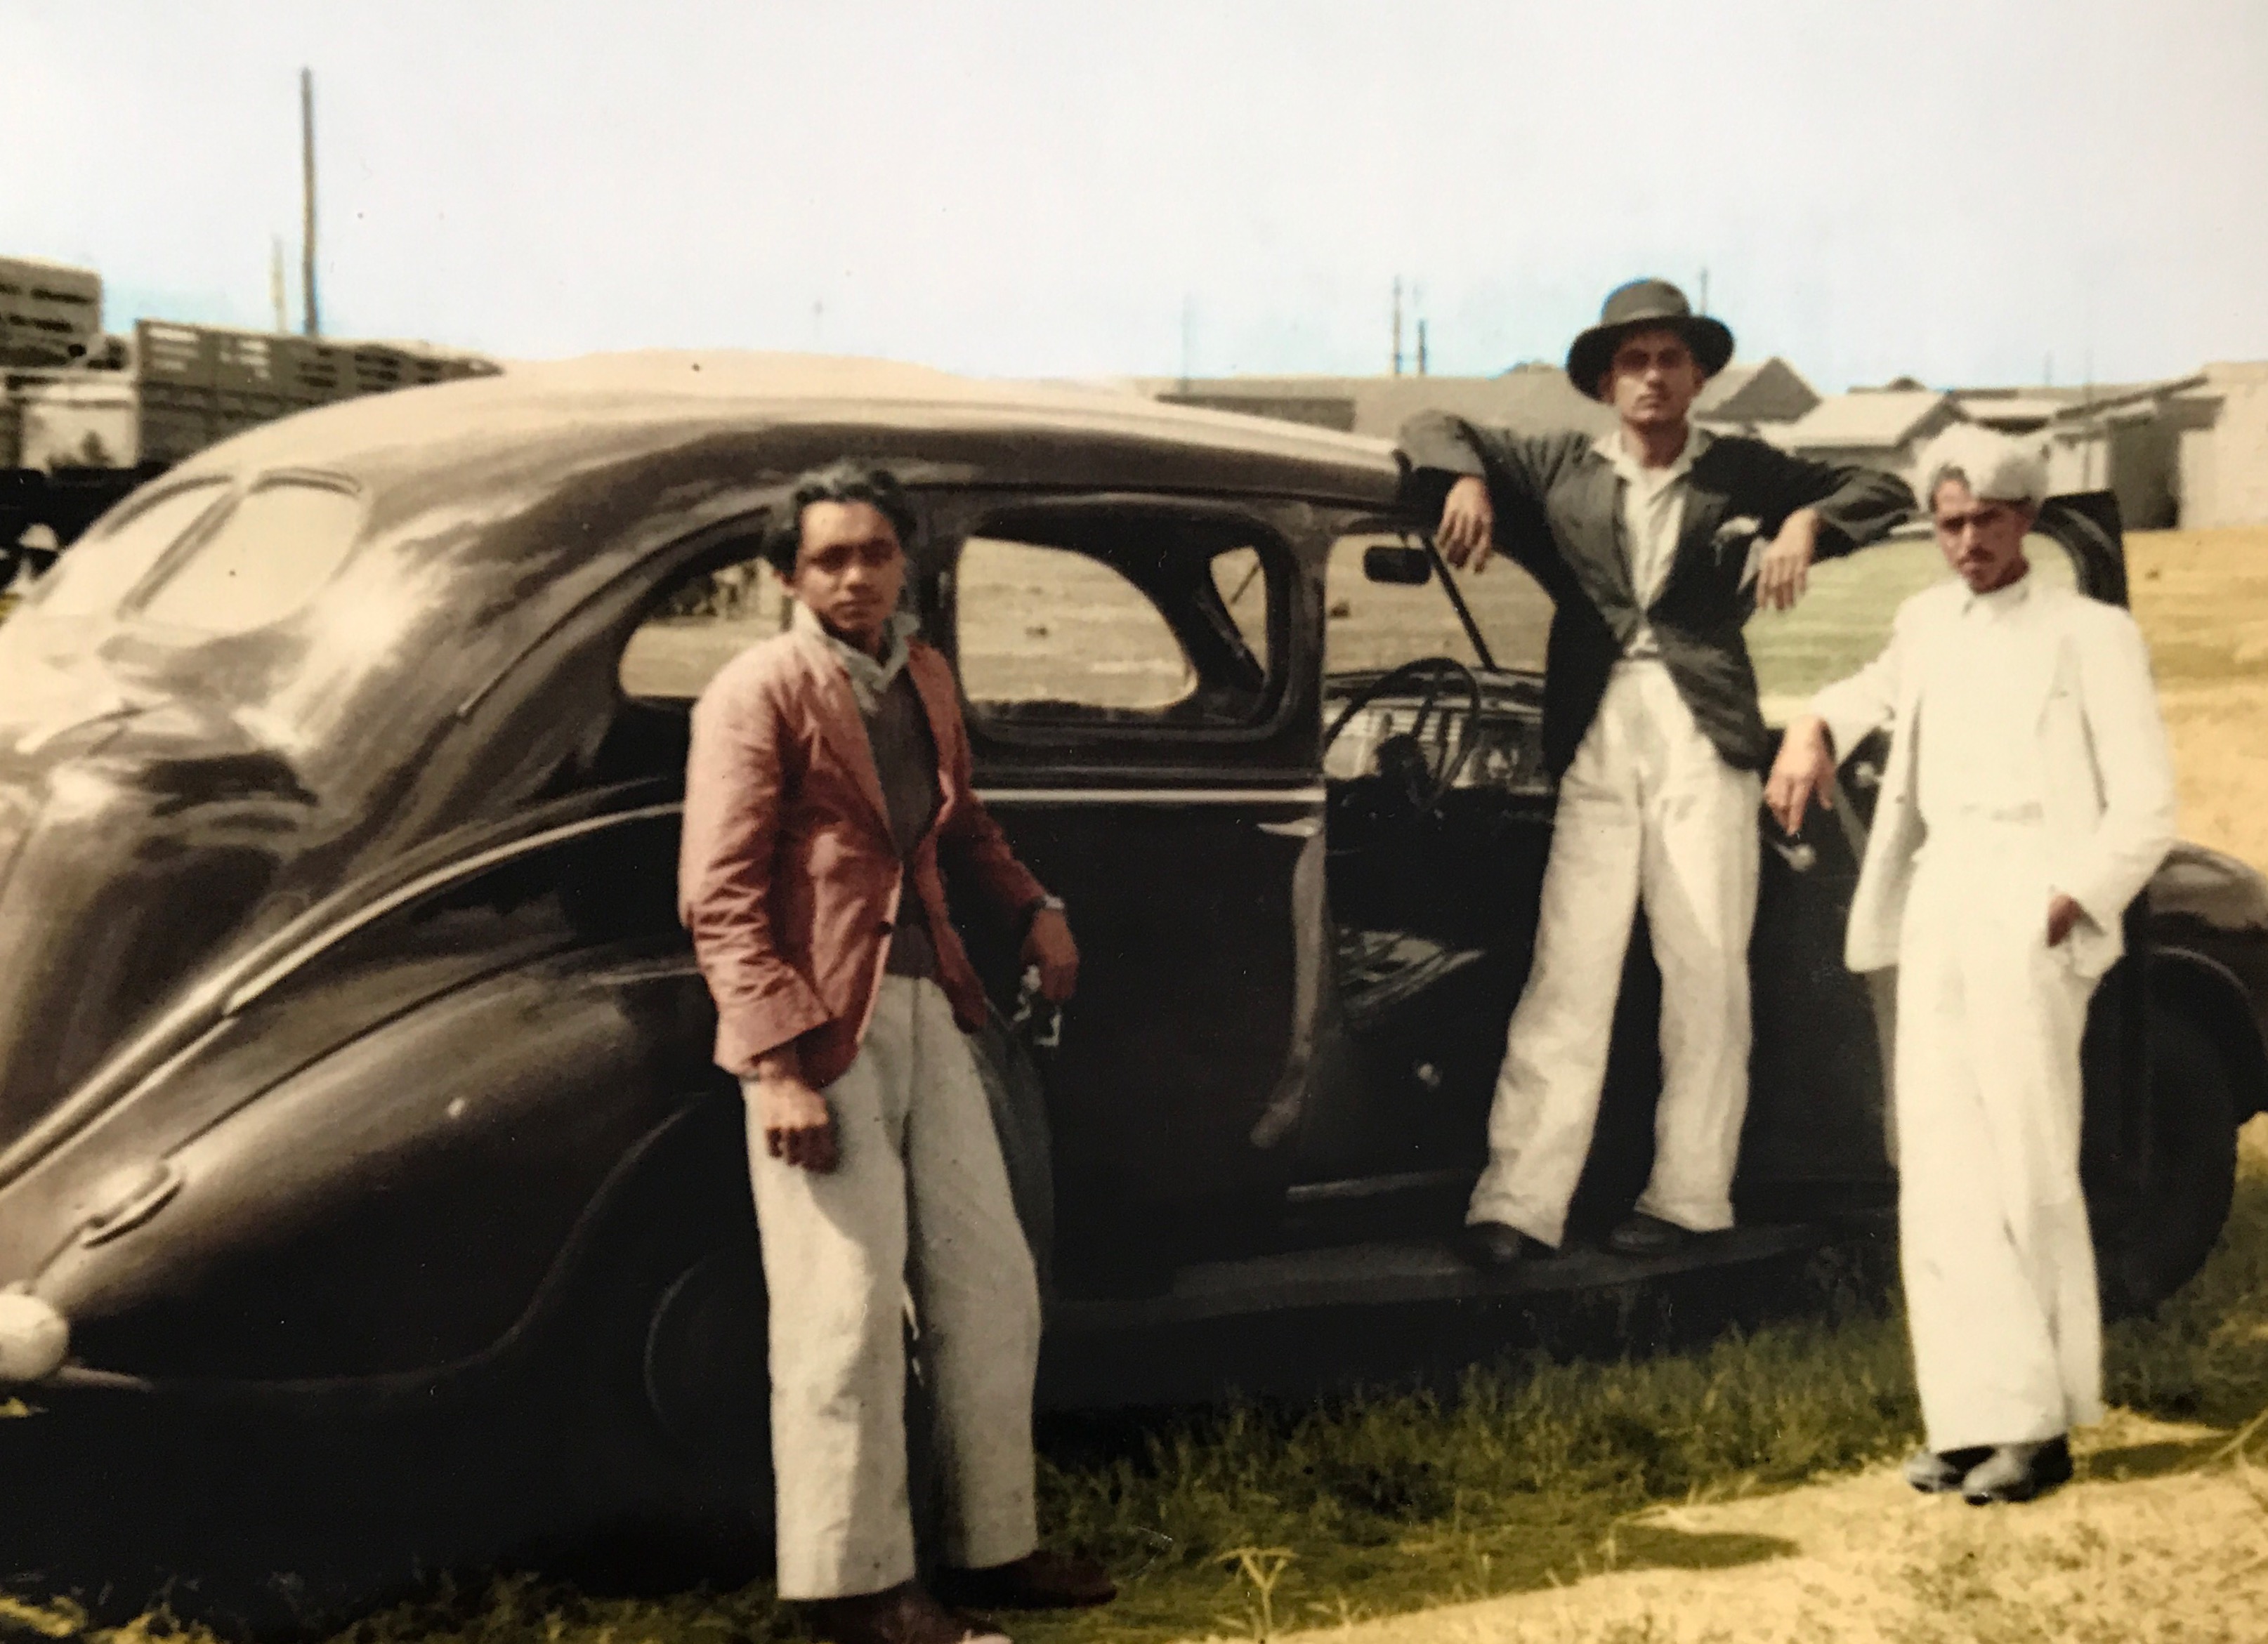 Meghjibhai Parmanand Dhokia and his car with two unknown persons in Nairobi Kenya in around 1945.